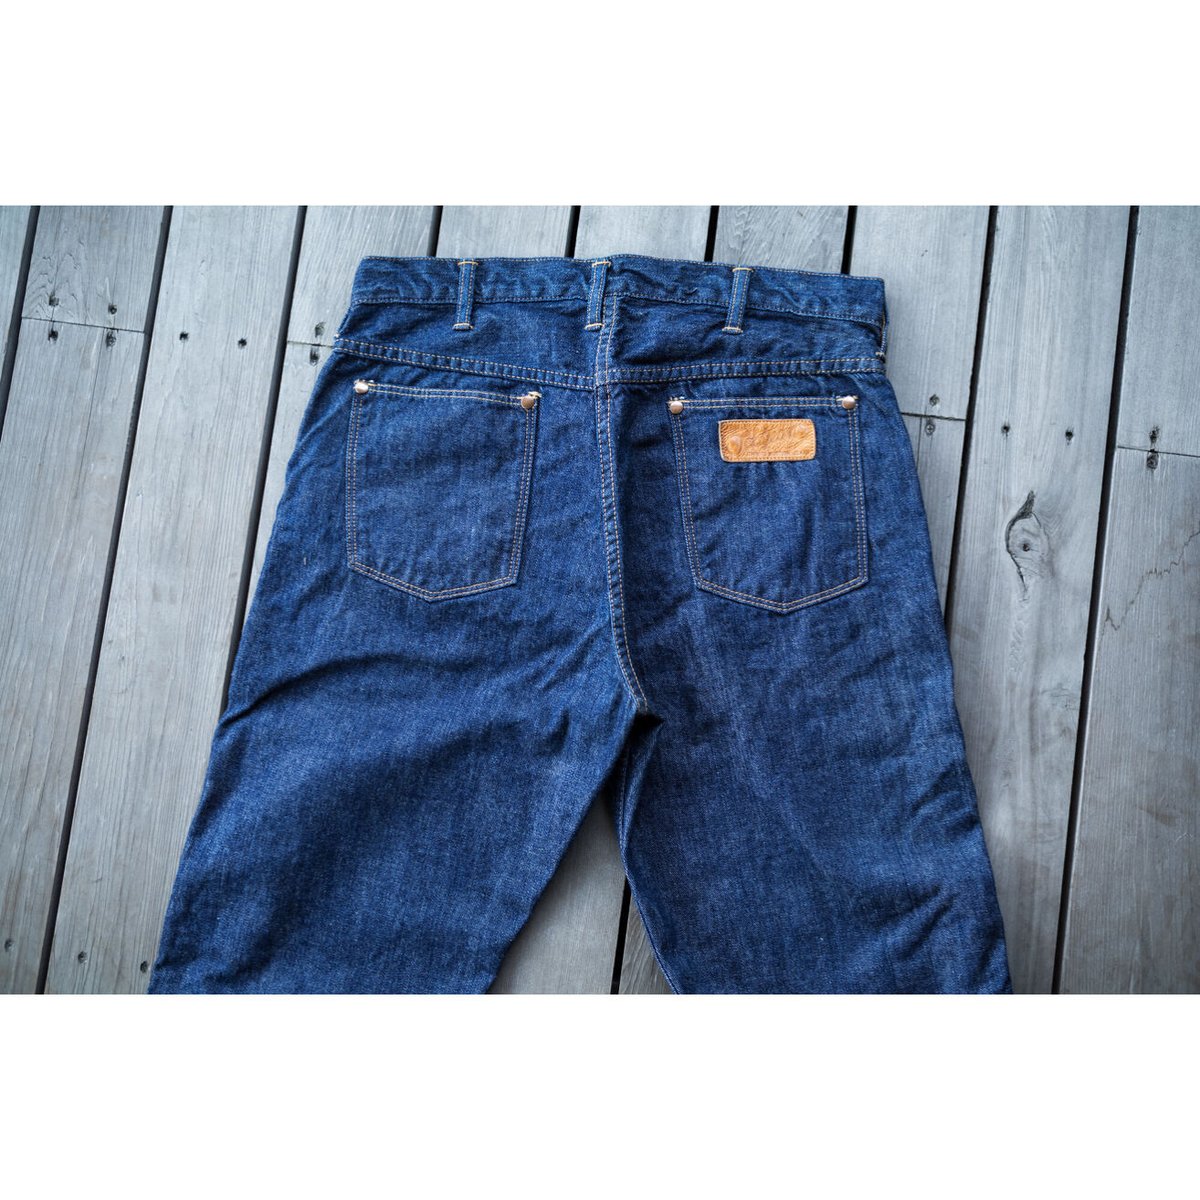 TCB jeans “Working Cat Hero Jeans” | cross over